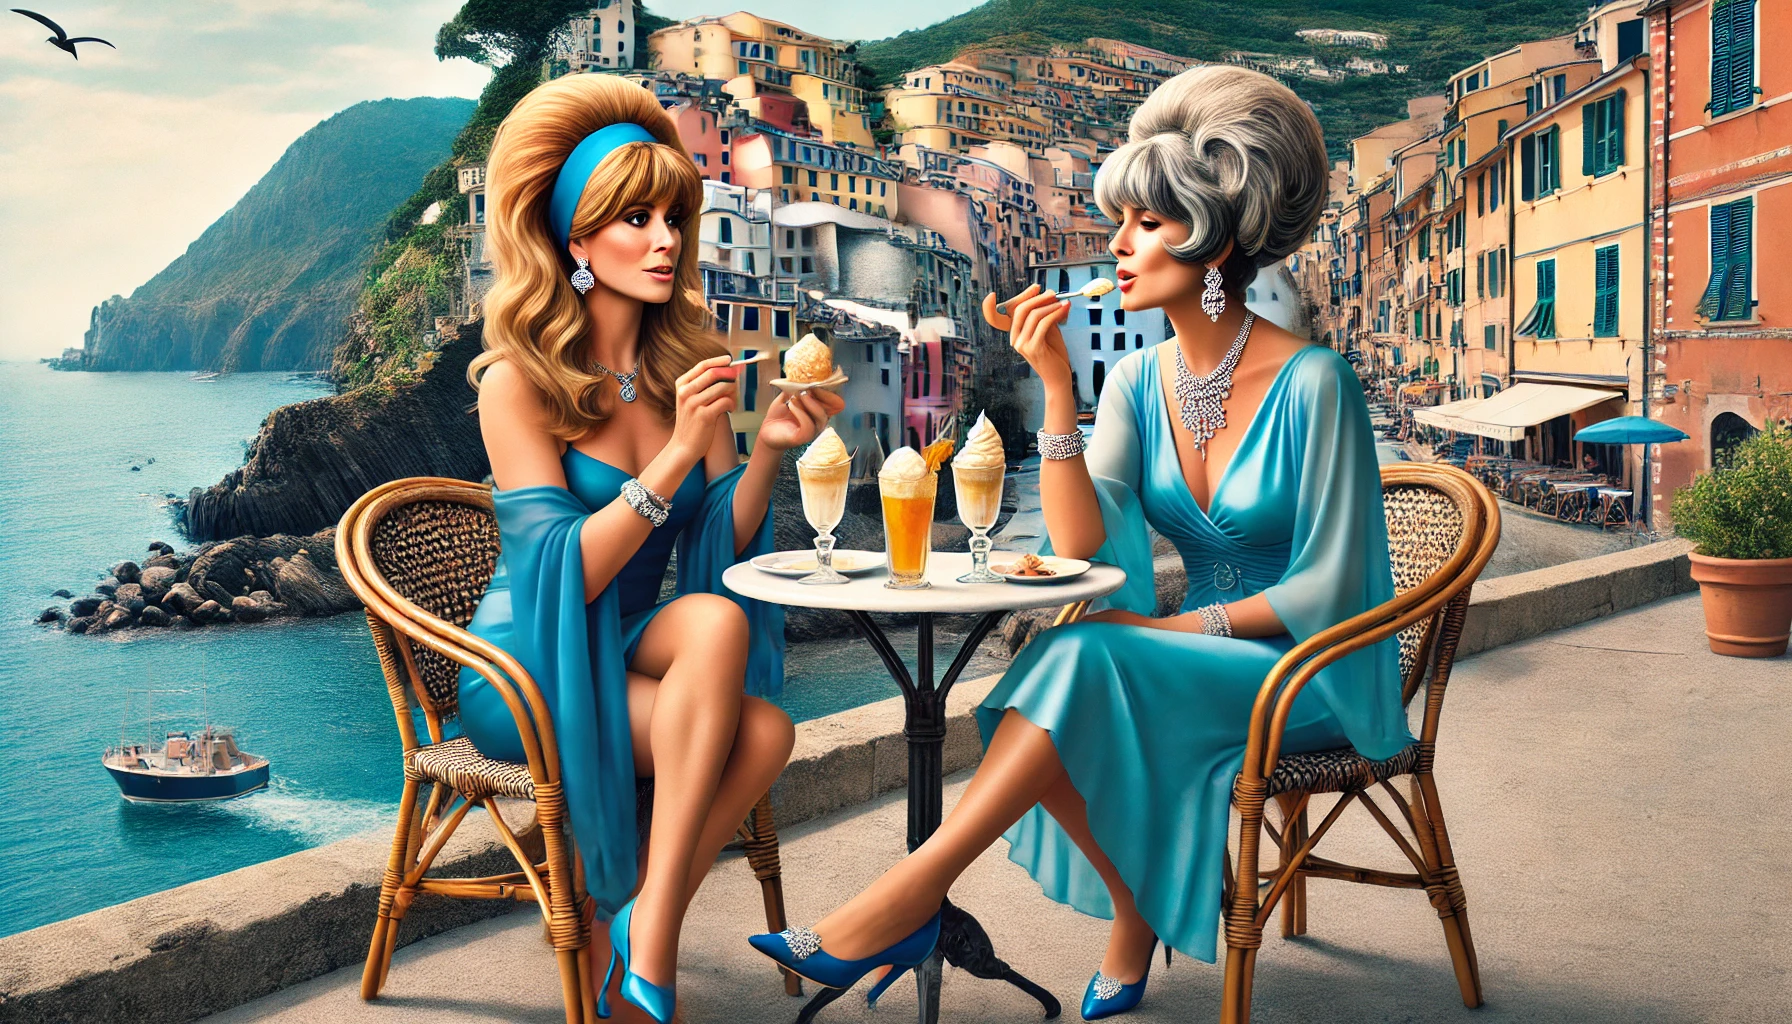 Kathy Fields and her mother Marie Read Saia enjoying gelato and drinks at a café in Cefalù, Italy